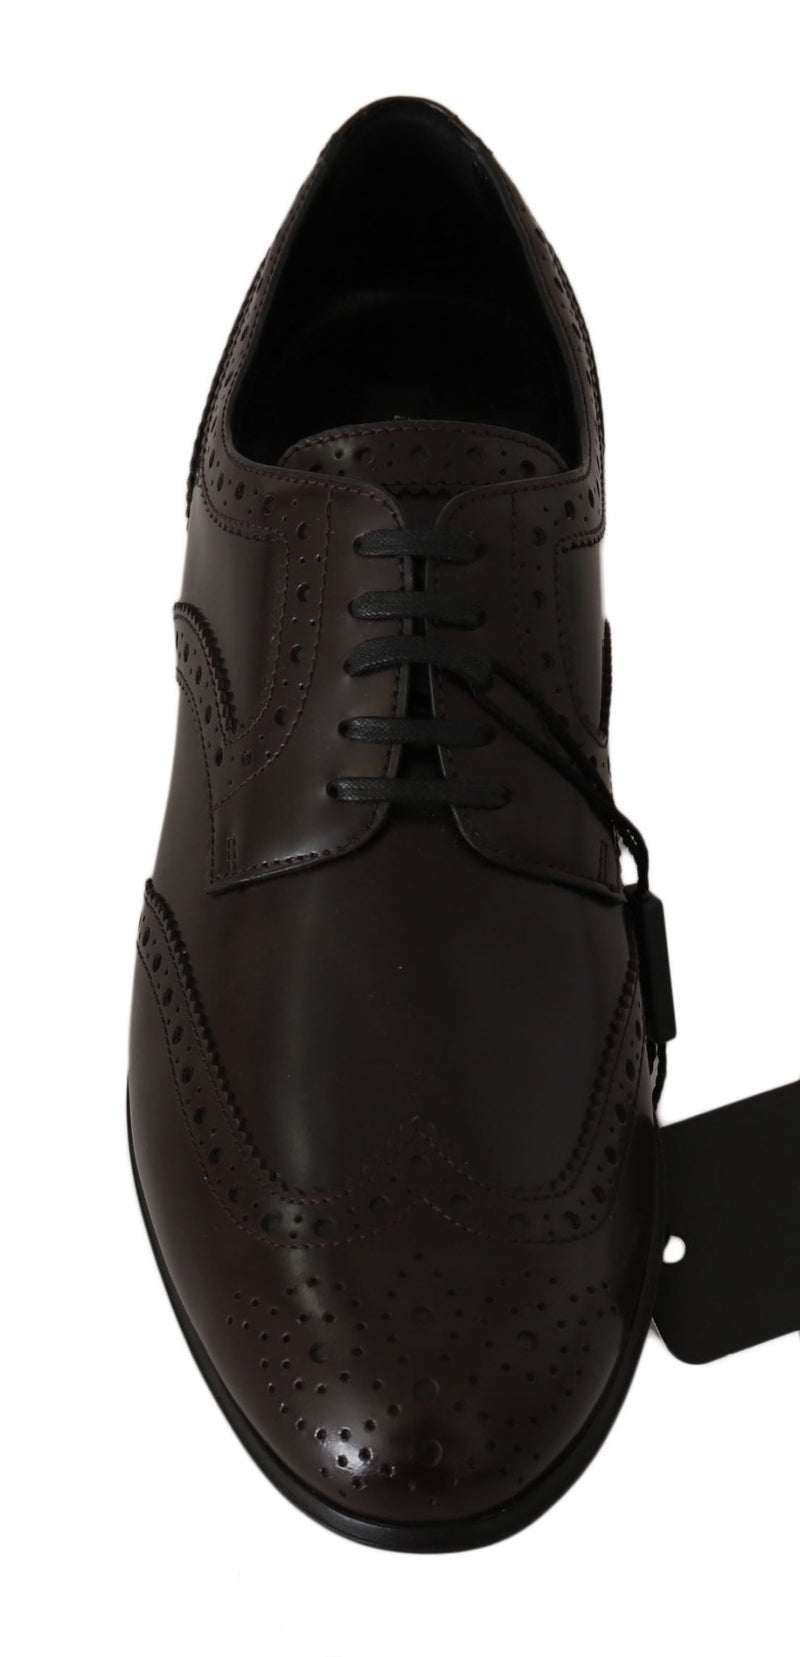 Brown Leather Broques Oxford Wingtip Shoes - Avaz Shop